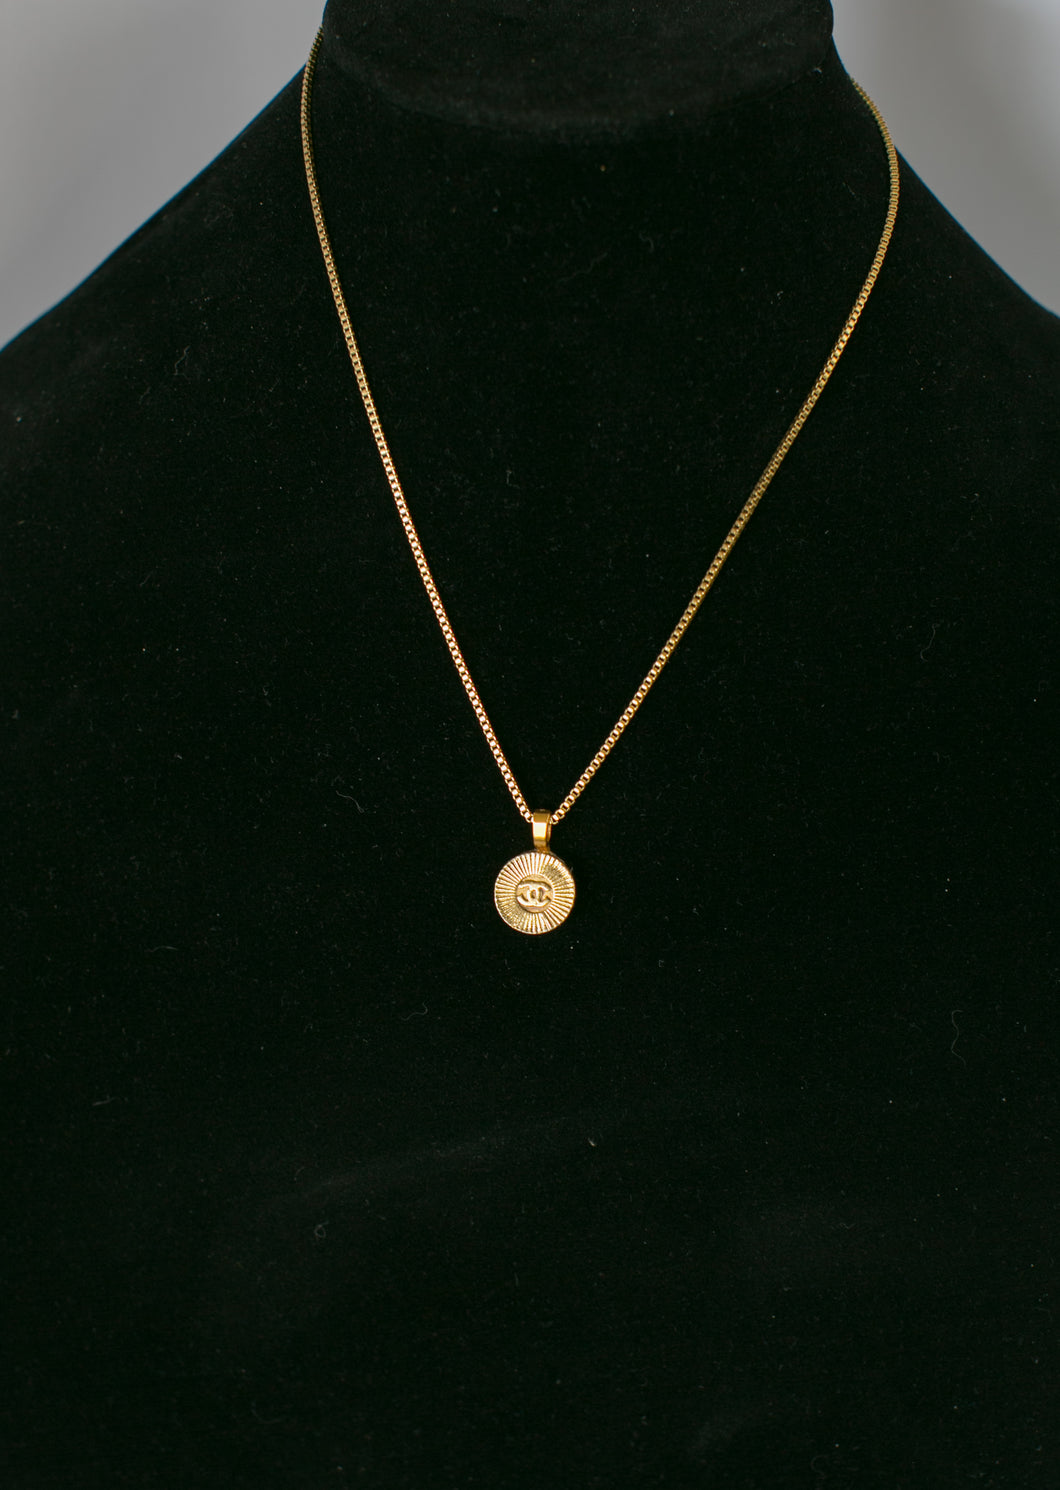 CC Charm Pendant and Gold Tone Chain